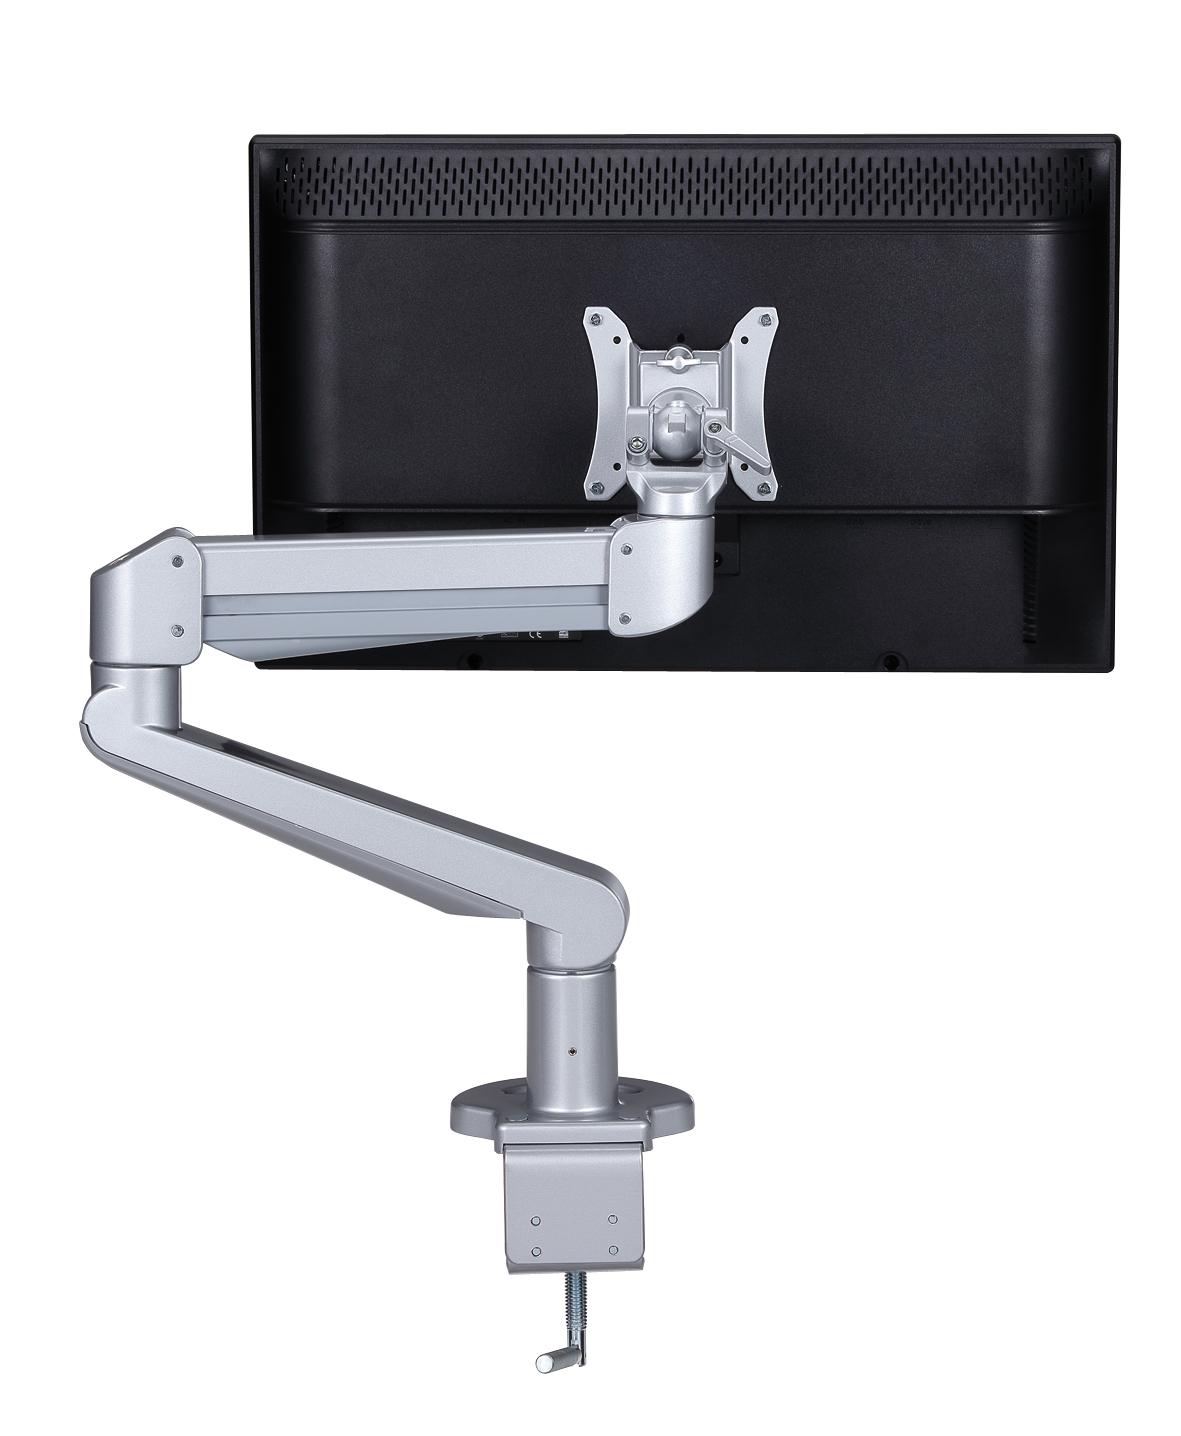 Desk Monitor Stand - Monitor Arm EA-211 - Heavy Weight